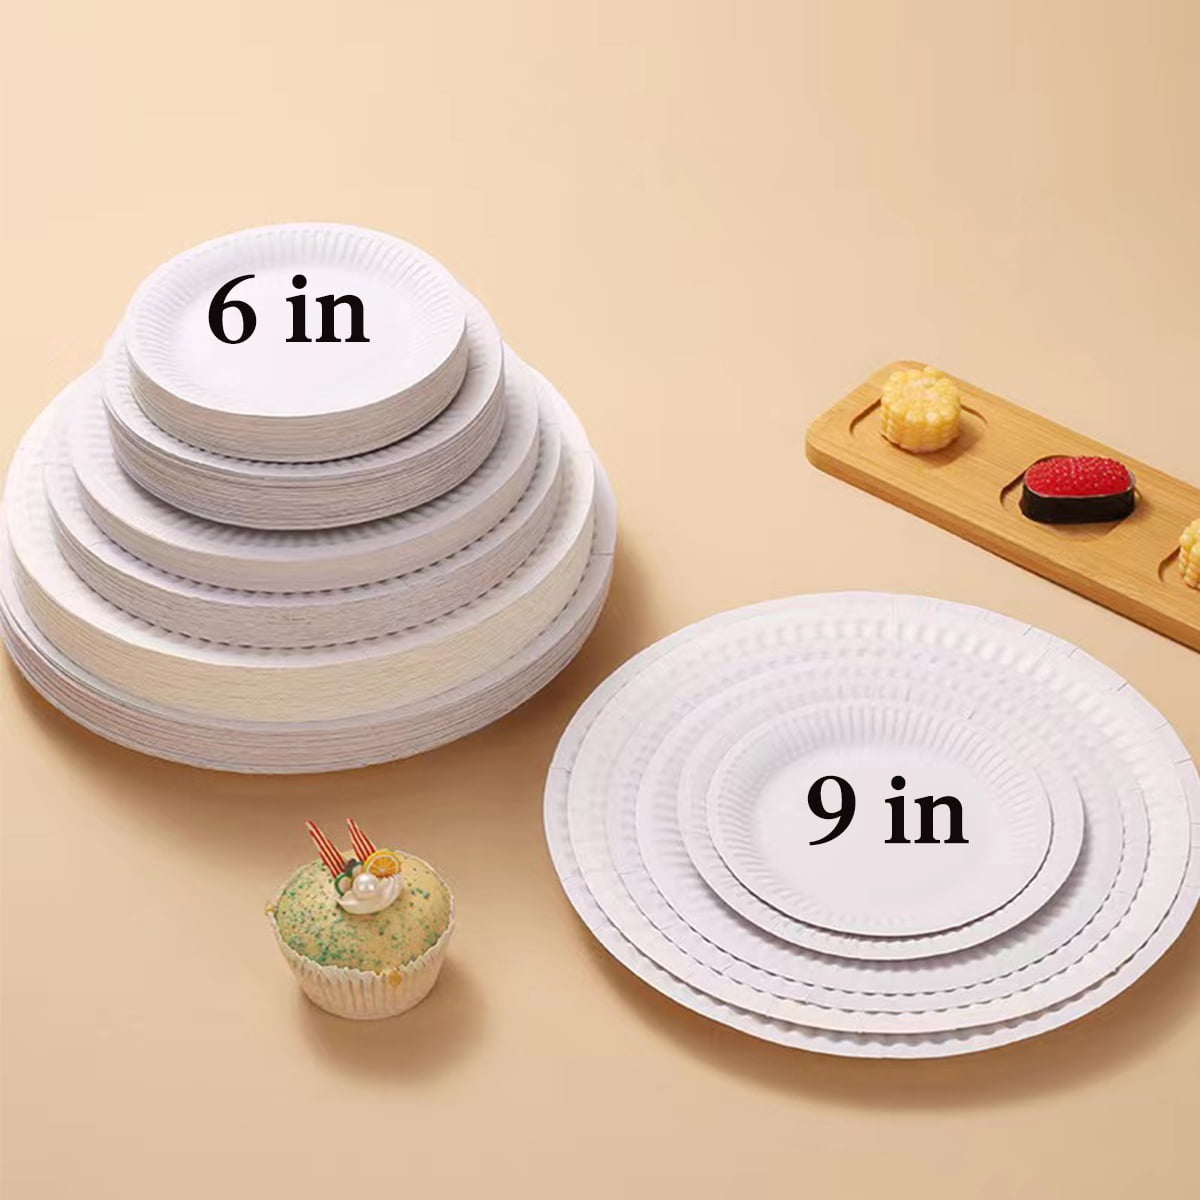  Paper Plates 9 Inch Bulk Paper Plates, White Paper Party Plates, Uncoated Disposable Microwavable Paper Plates, Microwave Safe Dishes For  Everyday Dinner Picnic BBQ Party Event Crafts